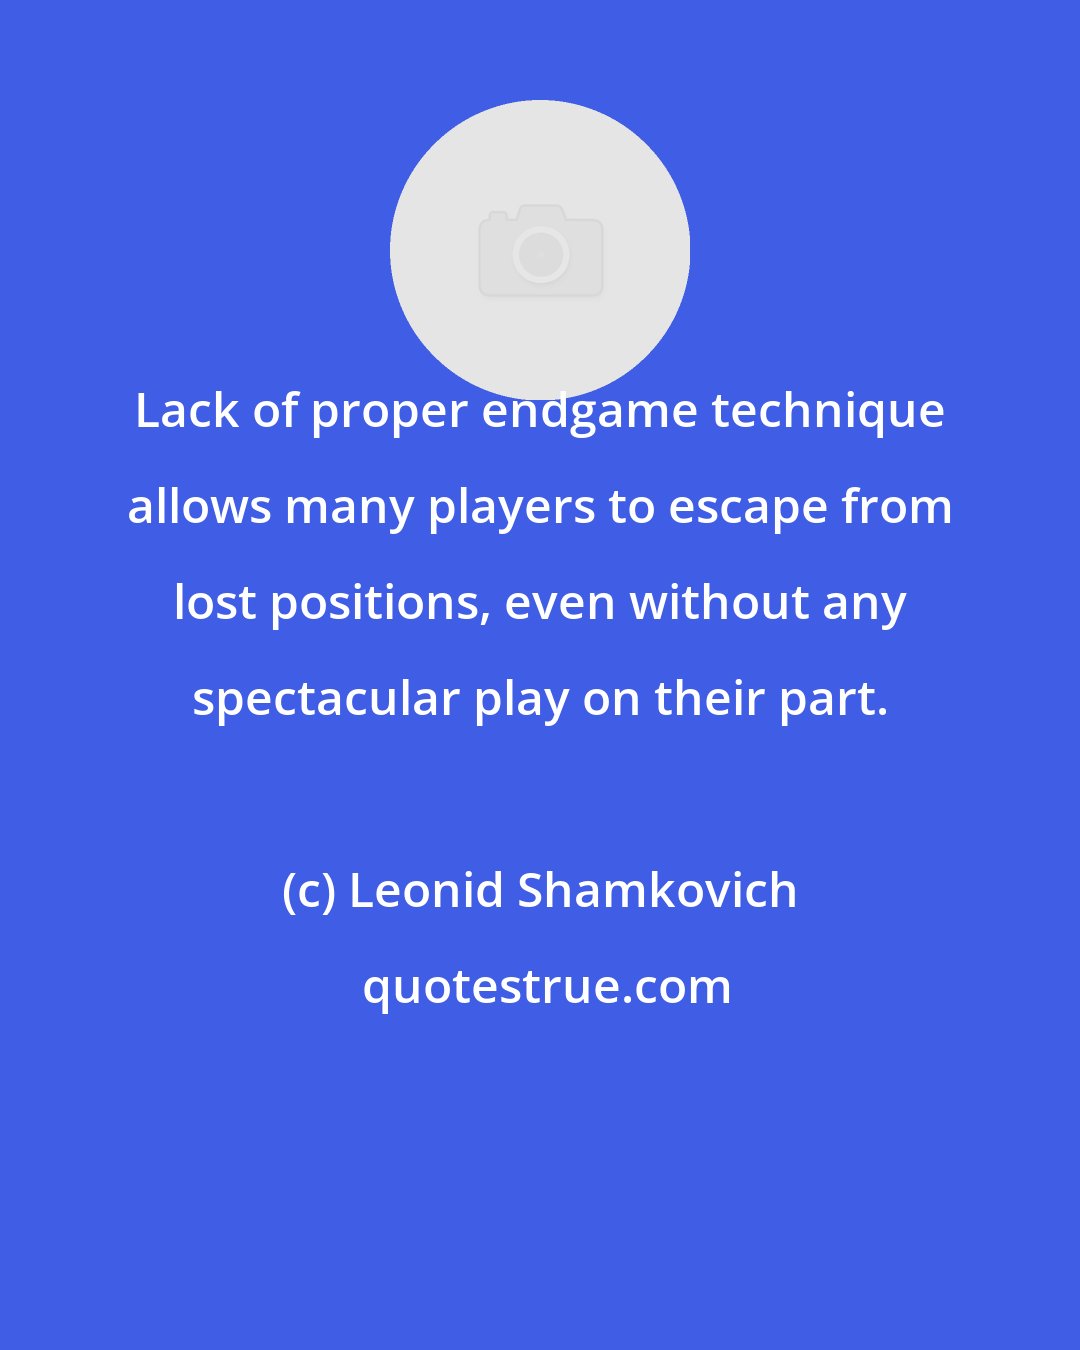 Leonid Shamkovich: Lack of proper endgame technique allows many players to escape from lost positions, even without any spectacular play on their part.